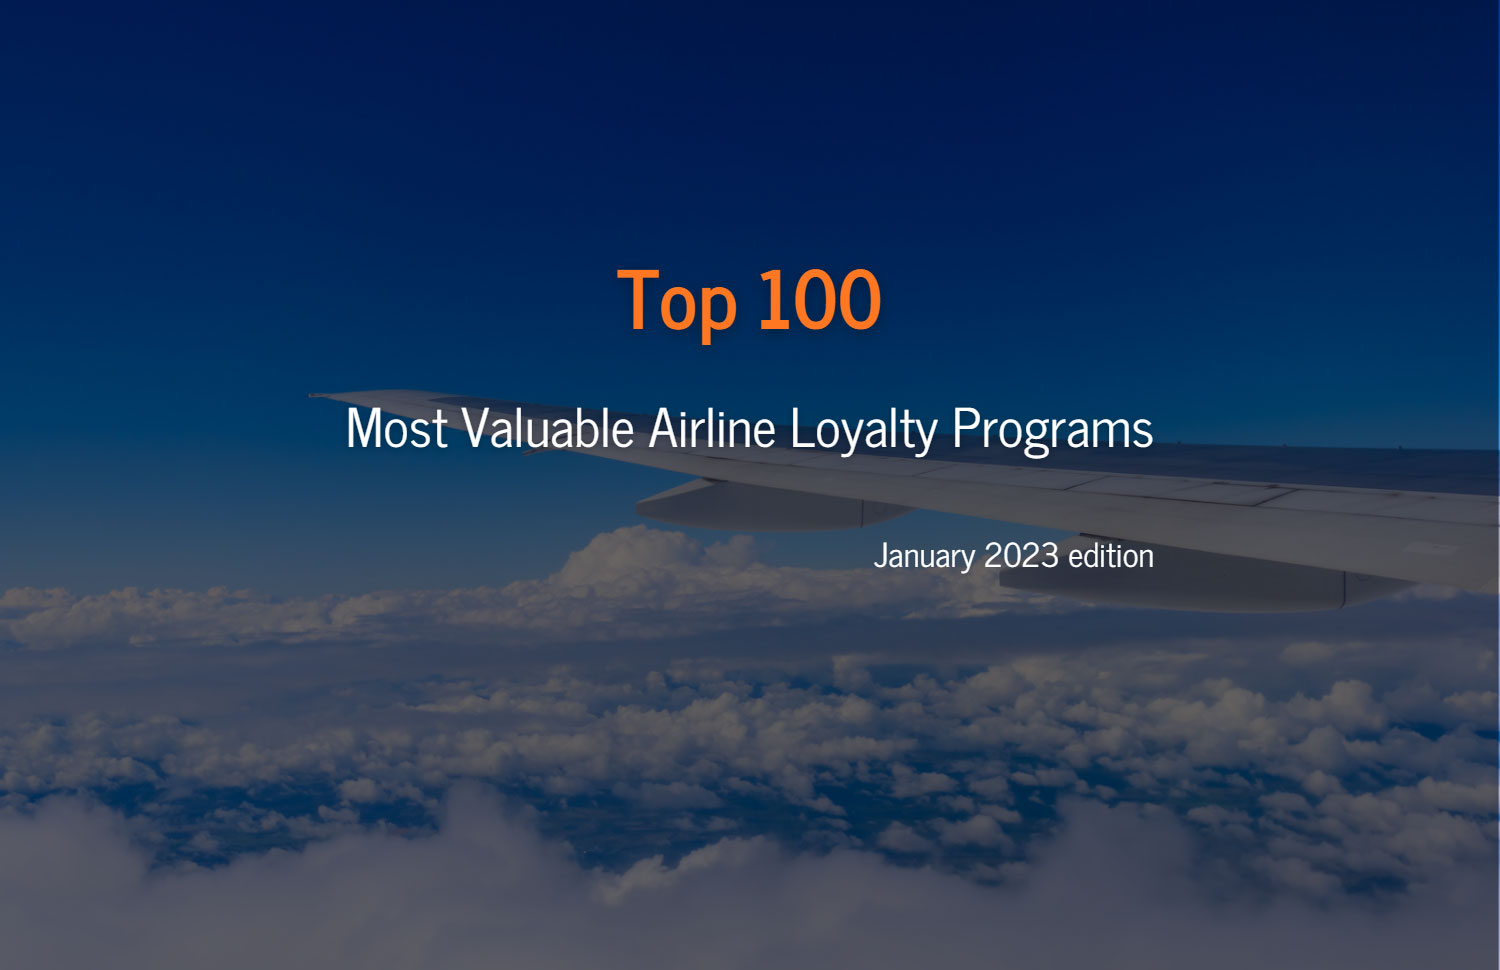 Top-100 Airline Loyalty Programs